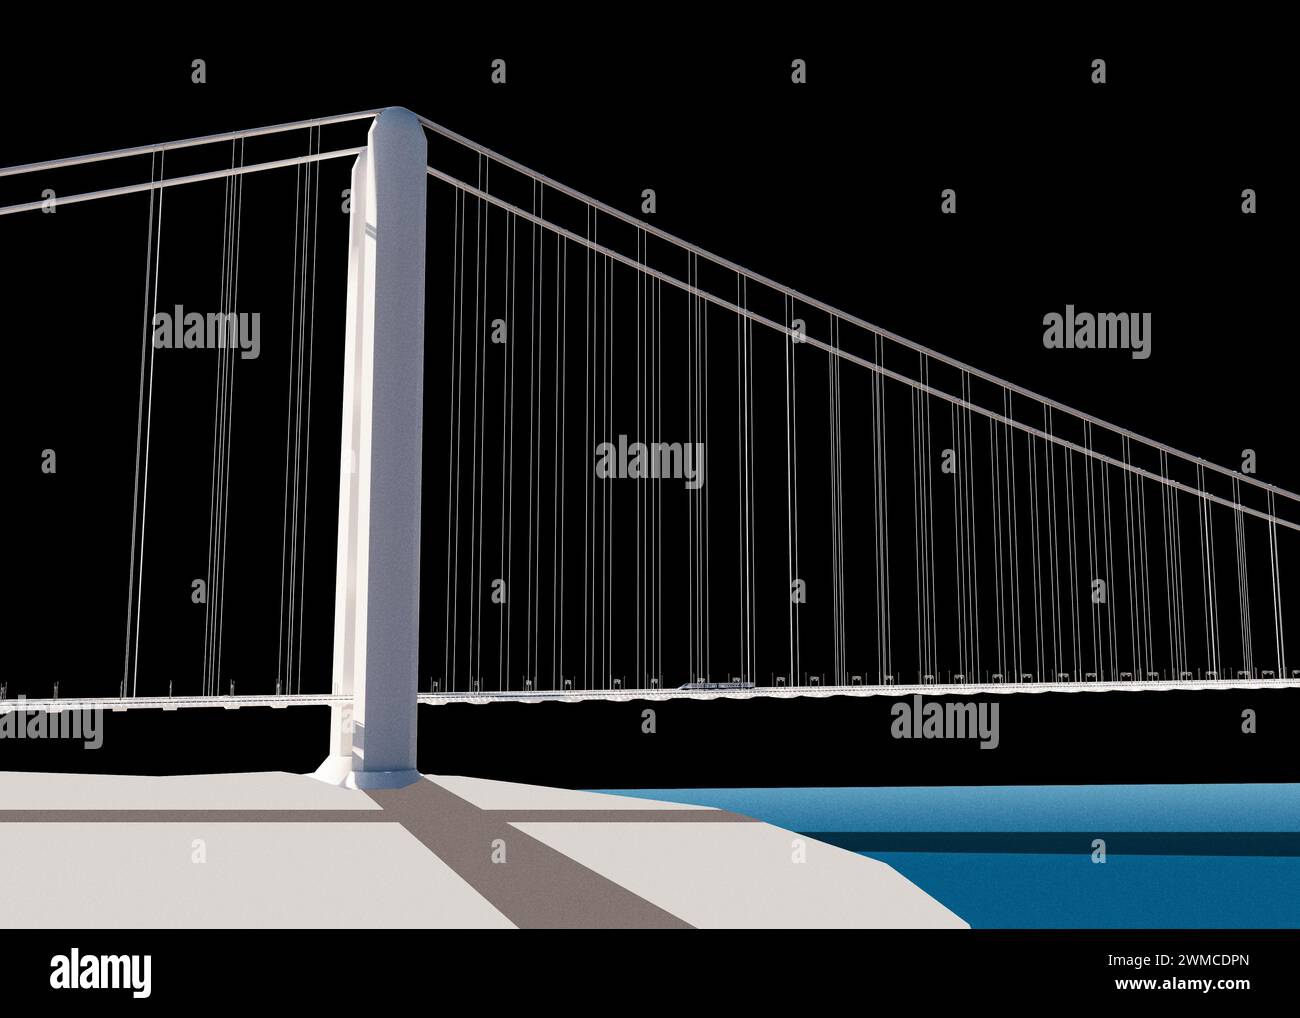 Bridge over the Strait of Messina, design and architecture, study of the deck, towers and suspensions. Architectural project. Sicily, Calabria. Italy Stock Photo